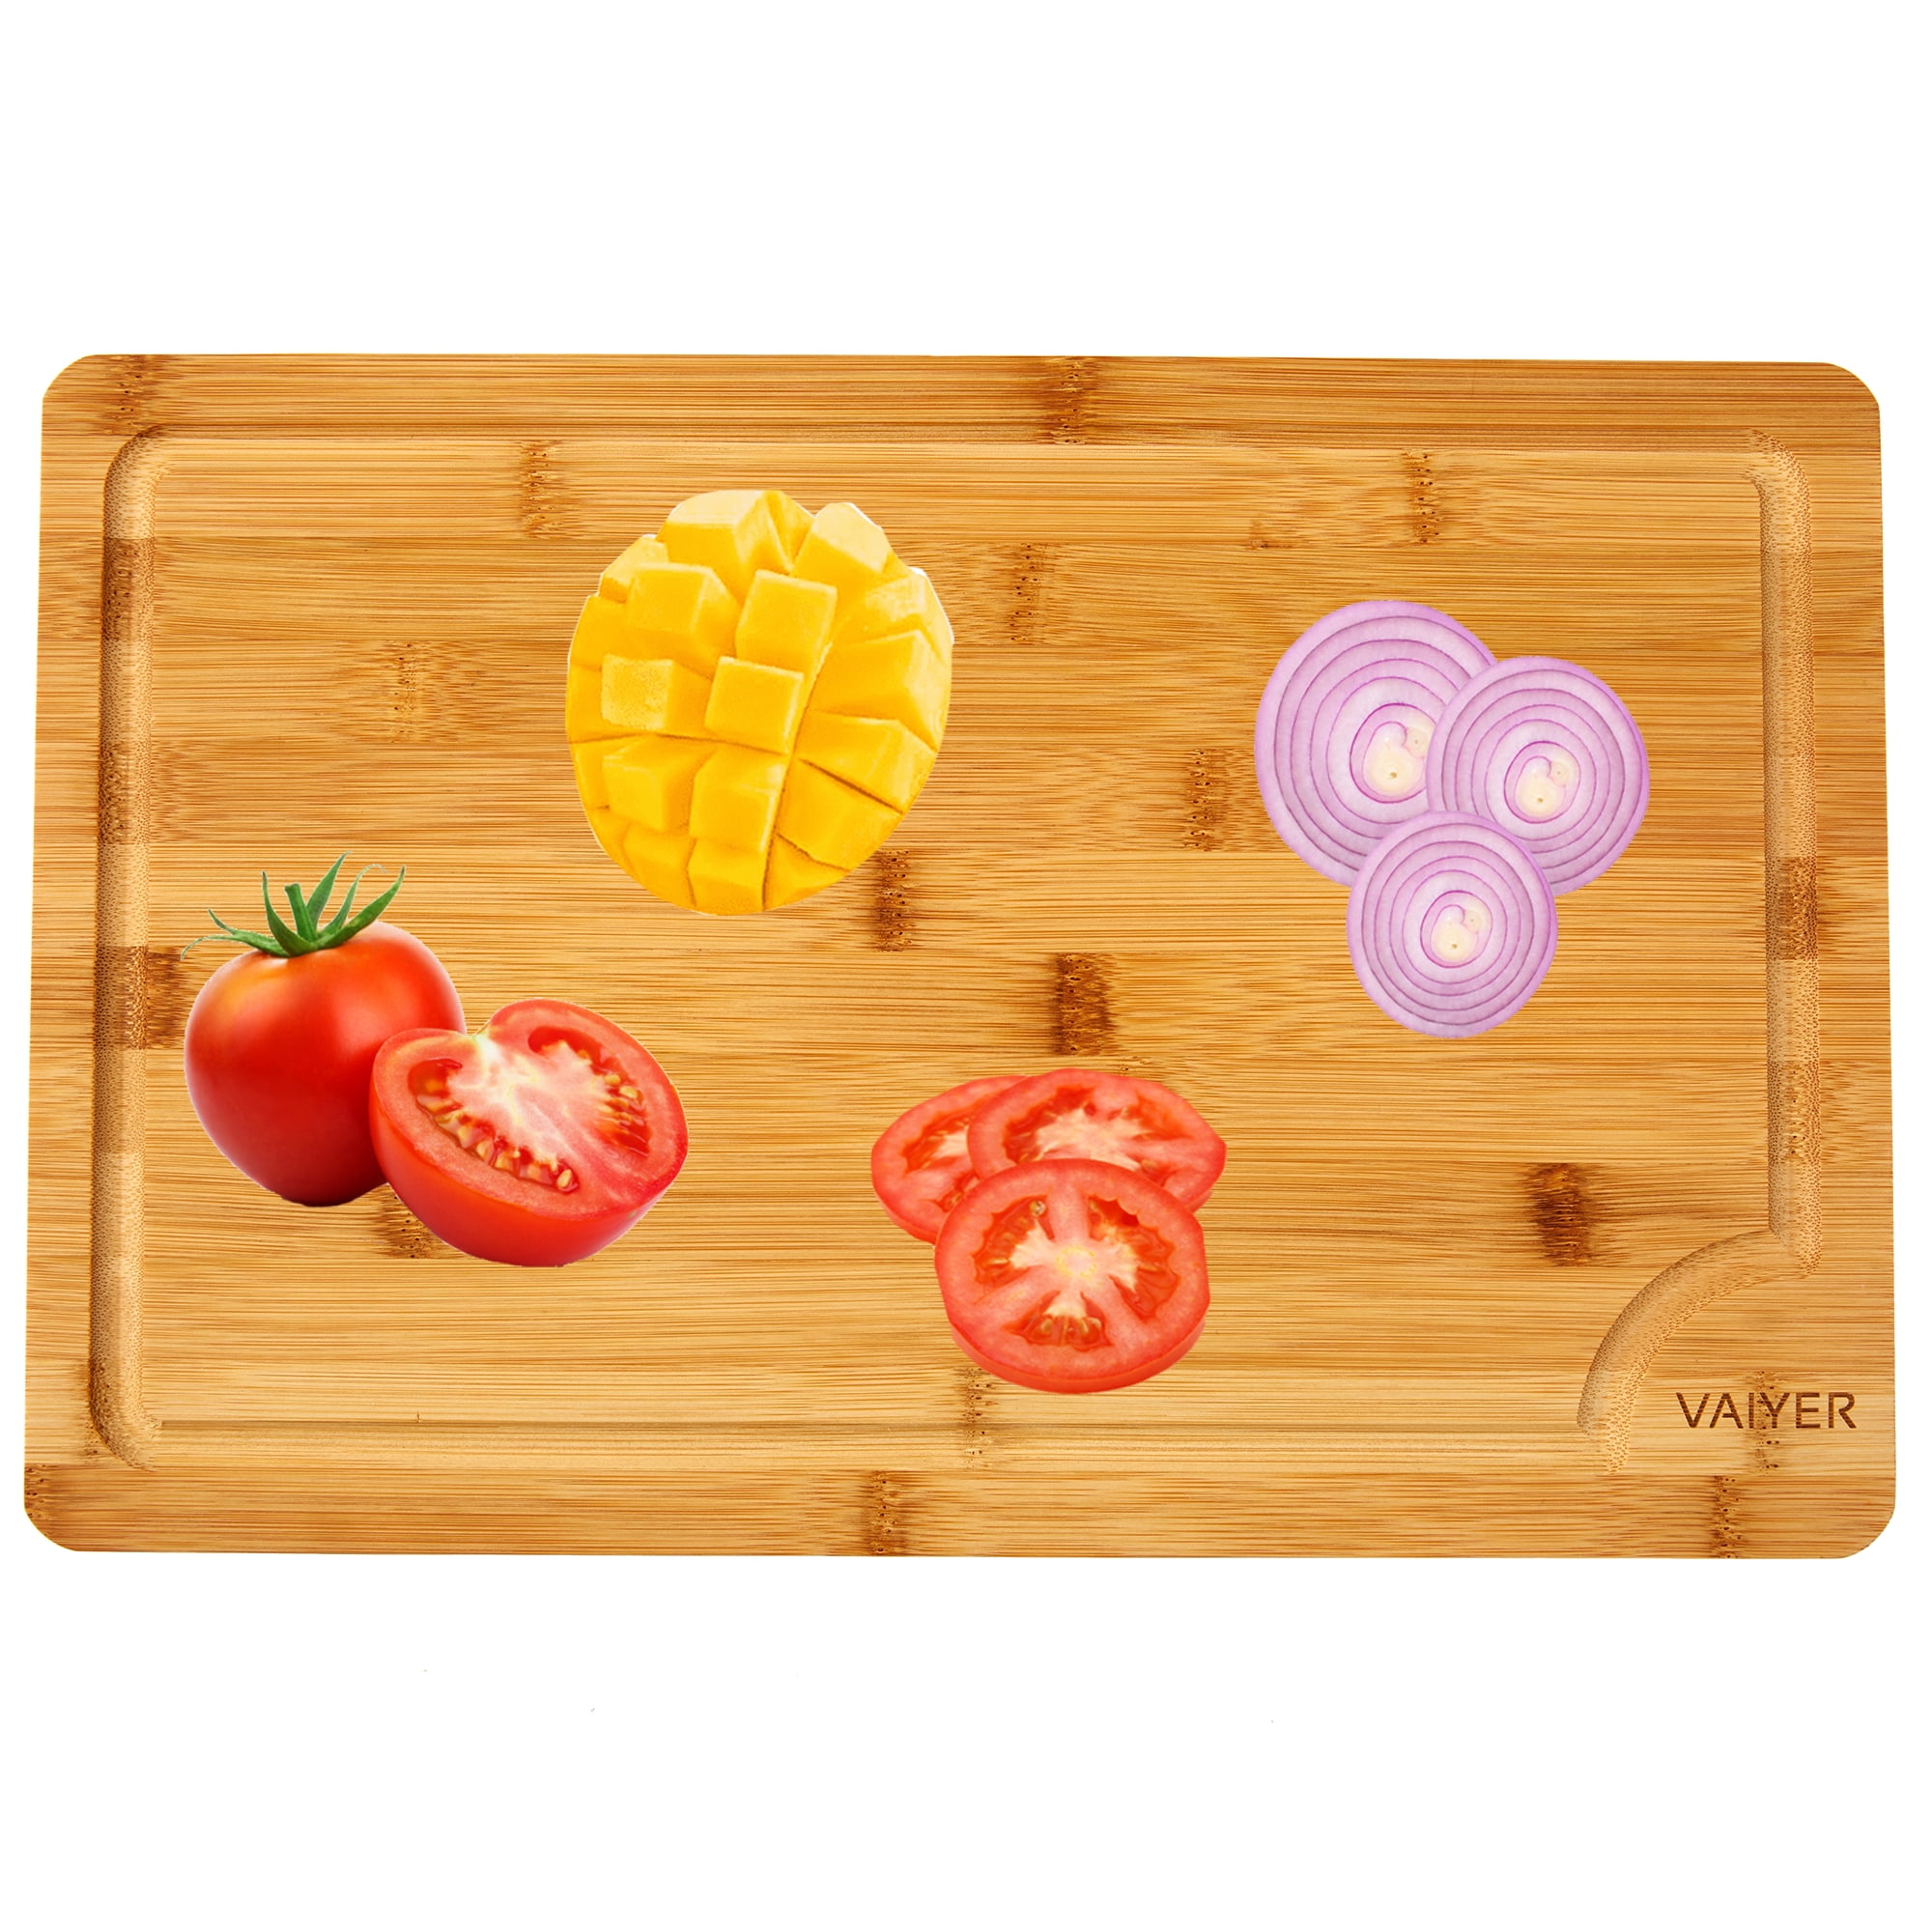 Meat Chicken Food Chopping Boards Plastic Kitchen Non Slip Chopping Cutting Board for Vegetables Strong Durable Plastic Fruits Easy to Wash.